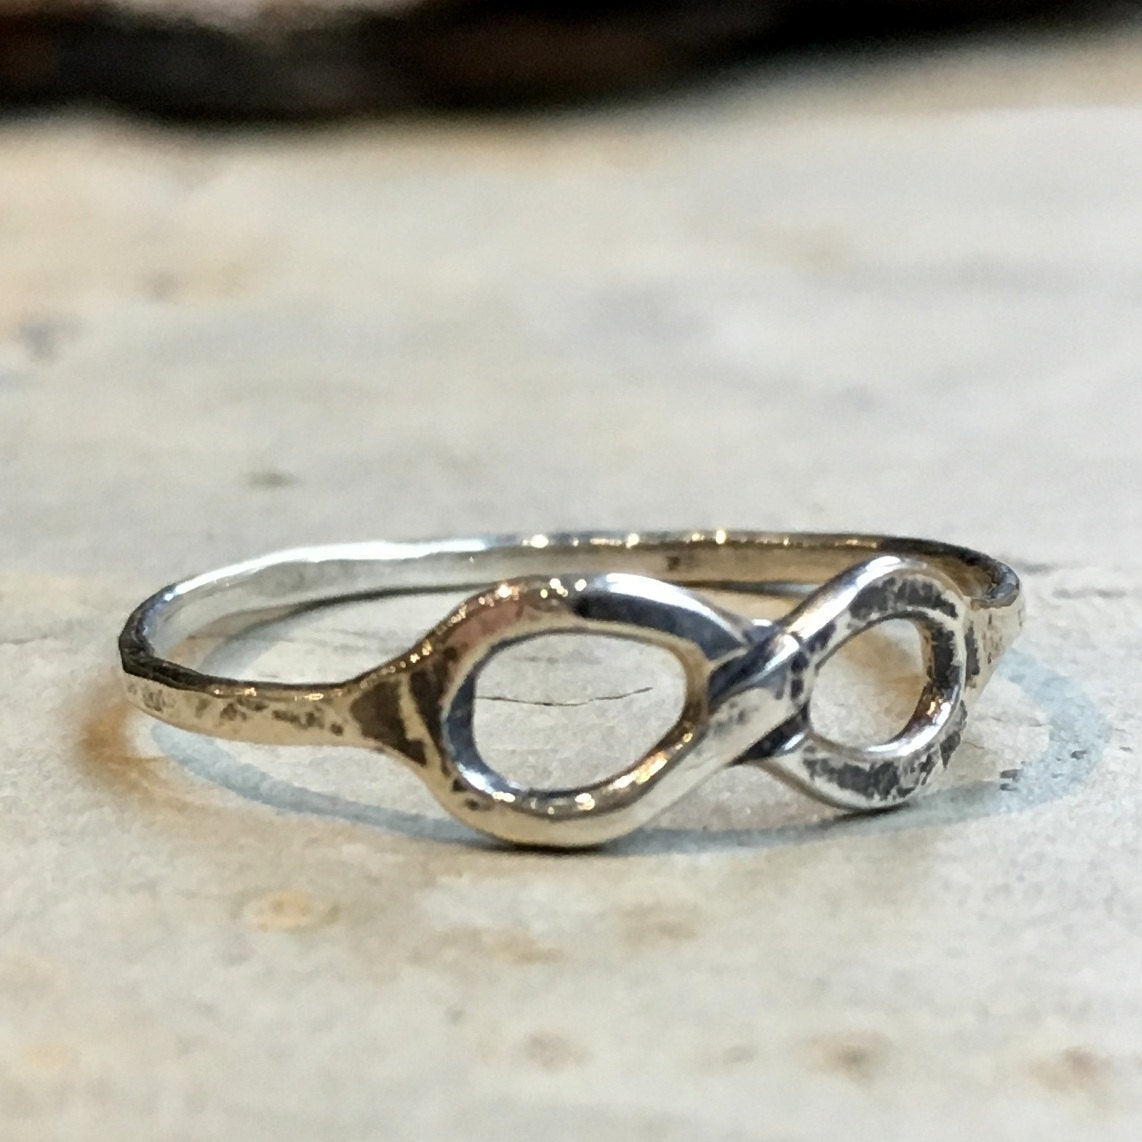 Silver Infinity Ring, Sterling silver ring, Infinity ring, Friendship ring, Bridesmaid ring, stacking ring, bff Gift - Infinite love R2469